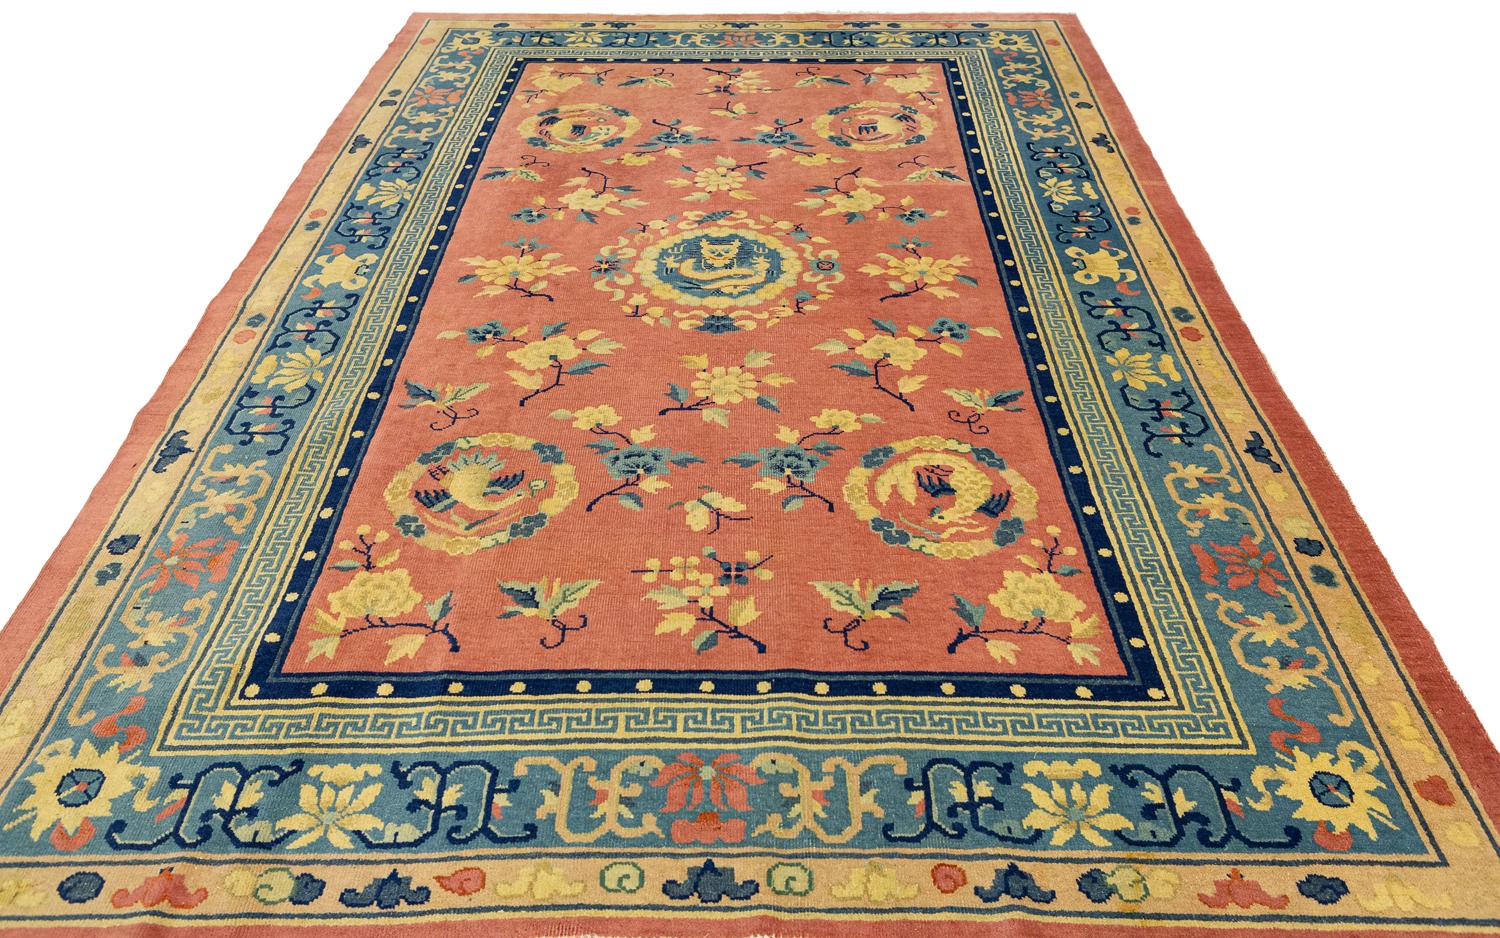 This is an antique pecking Chinese rug woven in during the beginning of the 20th century circa 1920s. it has an all-over field design comprised of blossoming tree branches with four bird motifs located in each of the corners of the rug which are